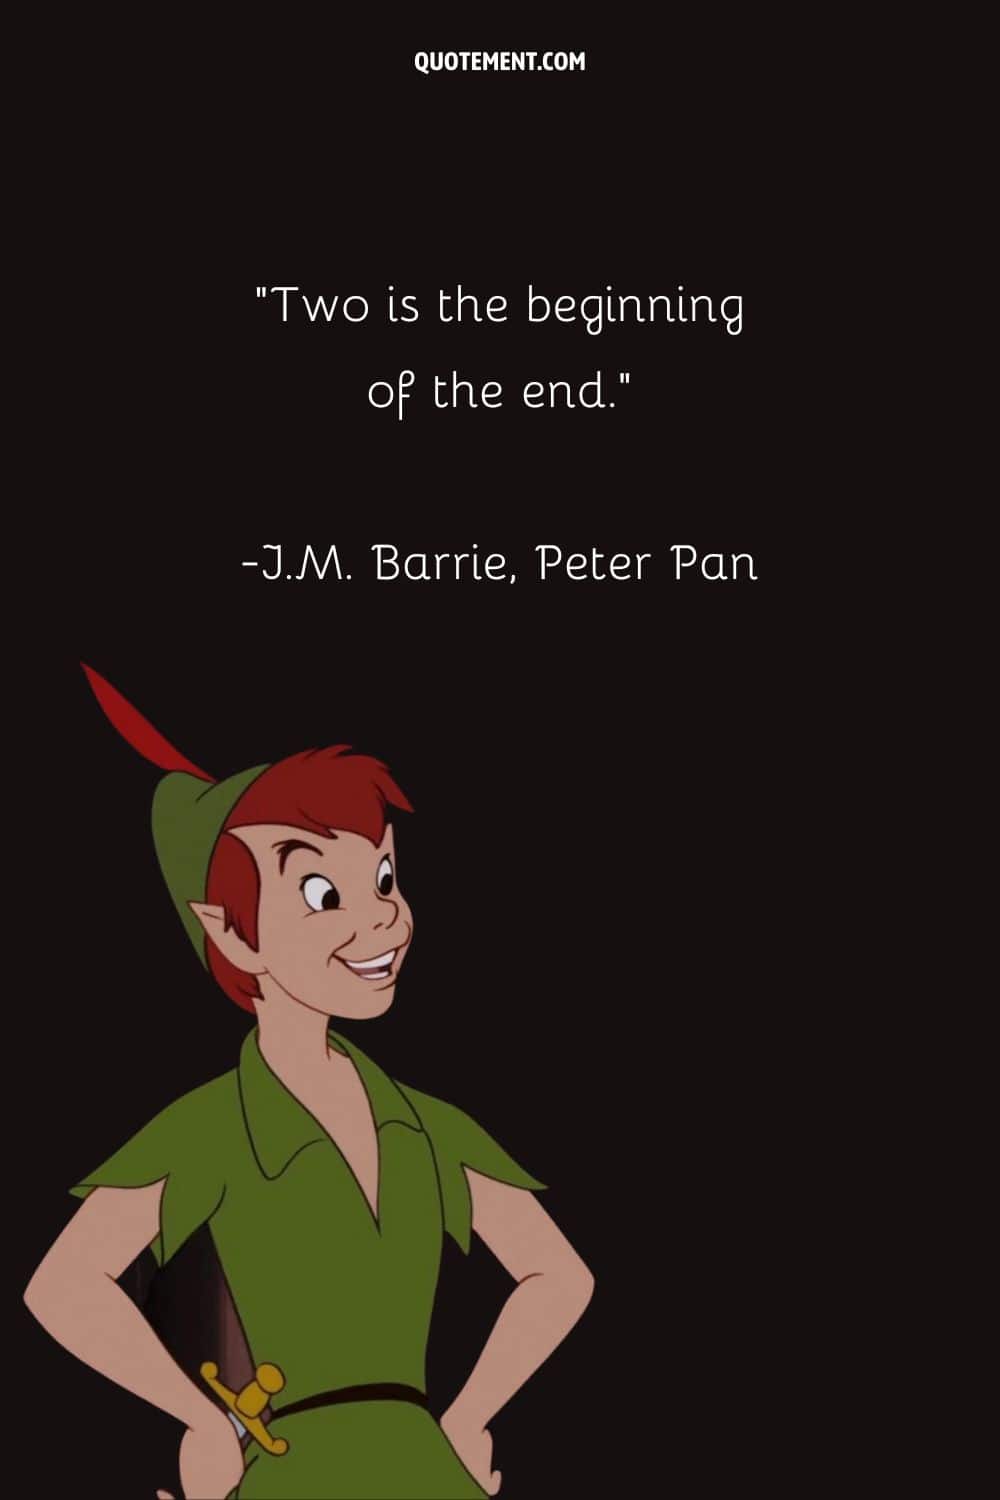 “Two is the beginning of the end.” ― J.M. Barrie, Peter Pan